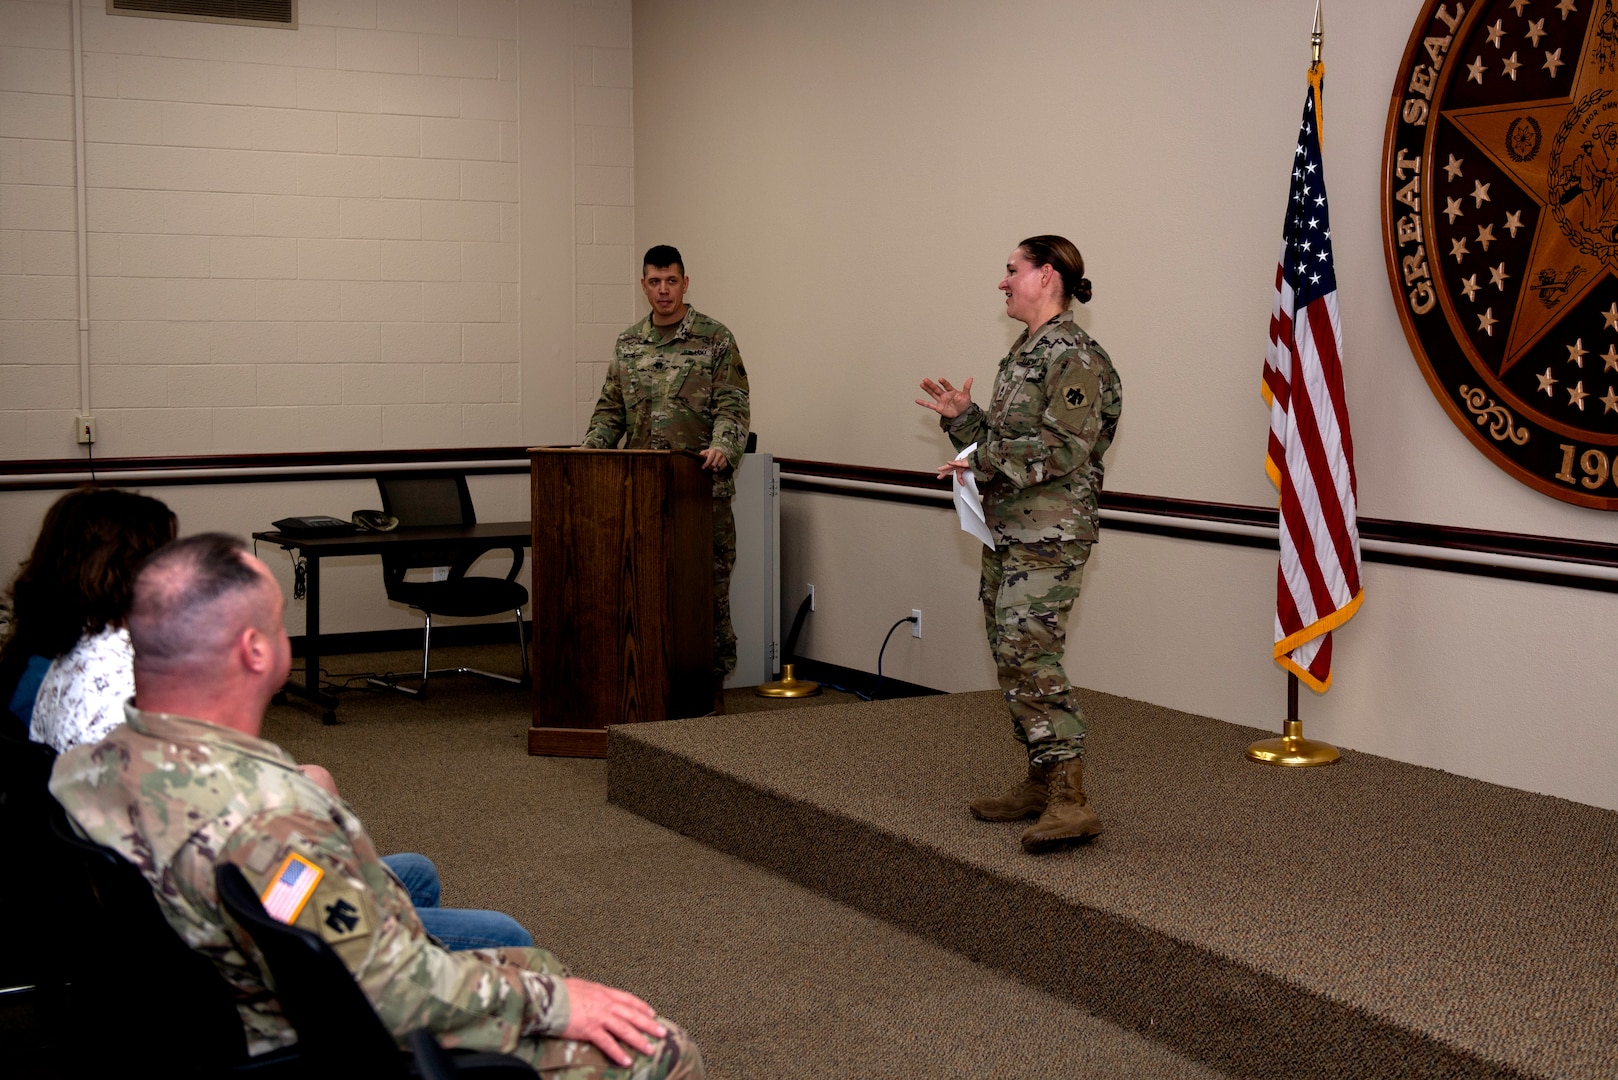 Oklahoma National Guard Master Sgt. Megan Mathews, battalion operations sergeant with the 1st Battalion, 160th Field Artillery Regiment, 45th Infantry Brigade Combat Team, delivers a thank you speech during her promotion ceremony held at Joint Force Headquarters in Oklahoma City, Dec. 15, 2021. (Oklahoma National Guard photo by Sgt. 1st Class Mireille Merilice-Roberts)